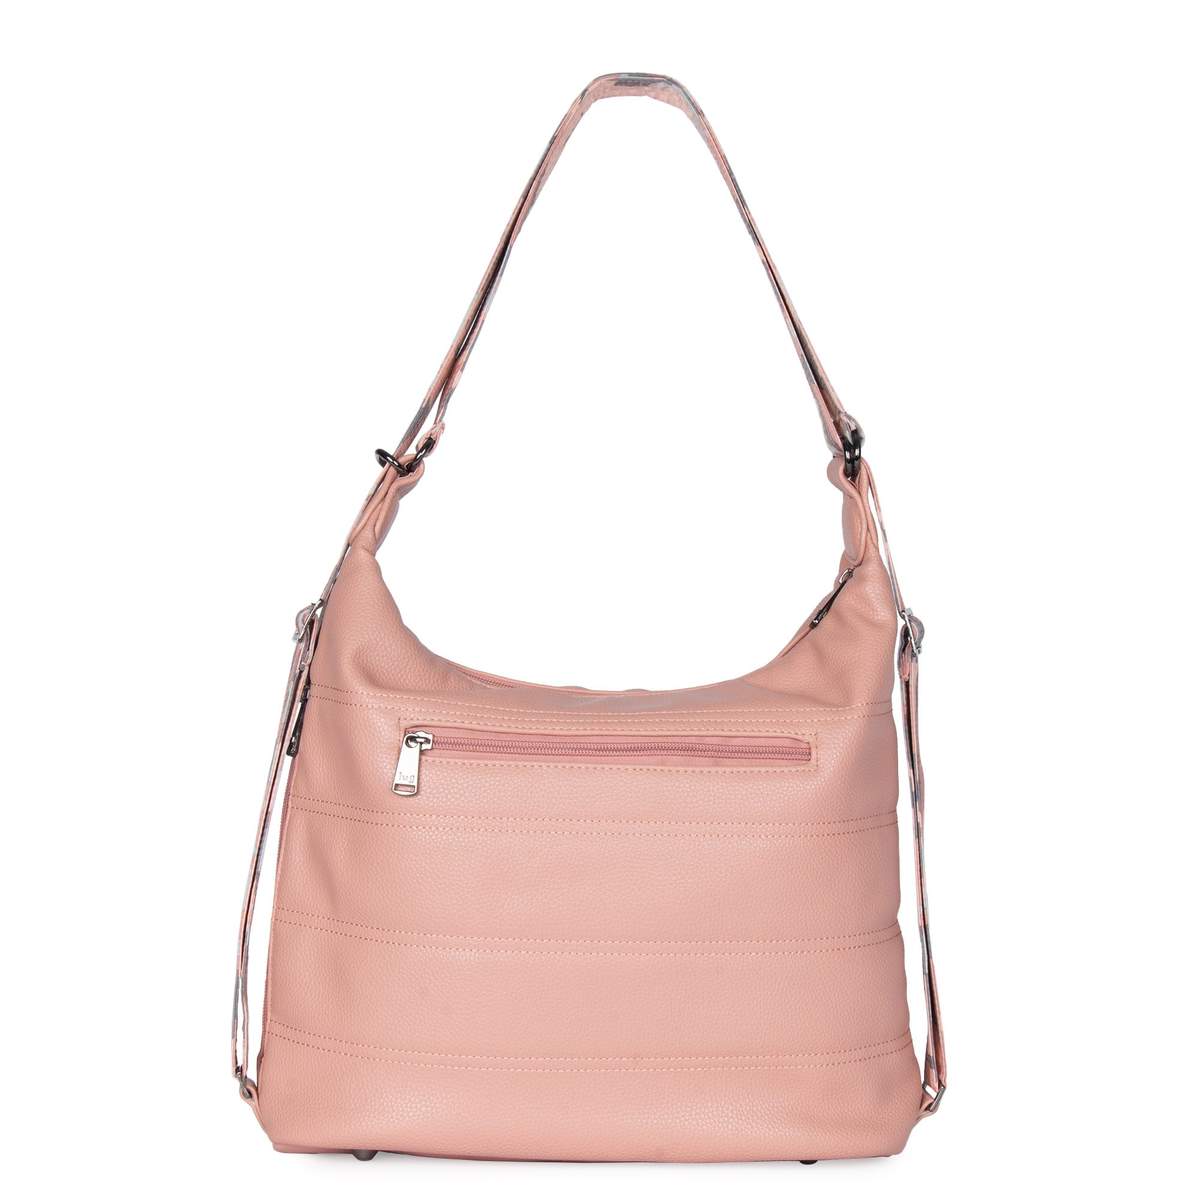 Because you loved it so much in our traditional fabrication, we had to bring it to you in Vegan Leather! Our Zipliner VL convertible hobo bag is sleek & oh-so-stylish - you won’t want to put this style down. Each solid-colored silhouette is paired with a coordinating printed adjustable strap that allows you to wear this bag as a shoulder bag or backpack.